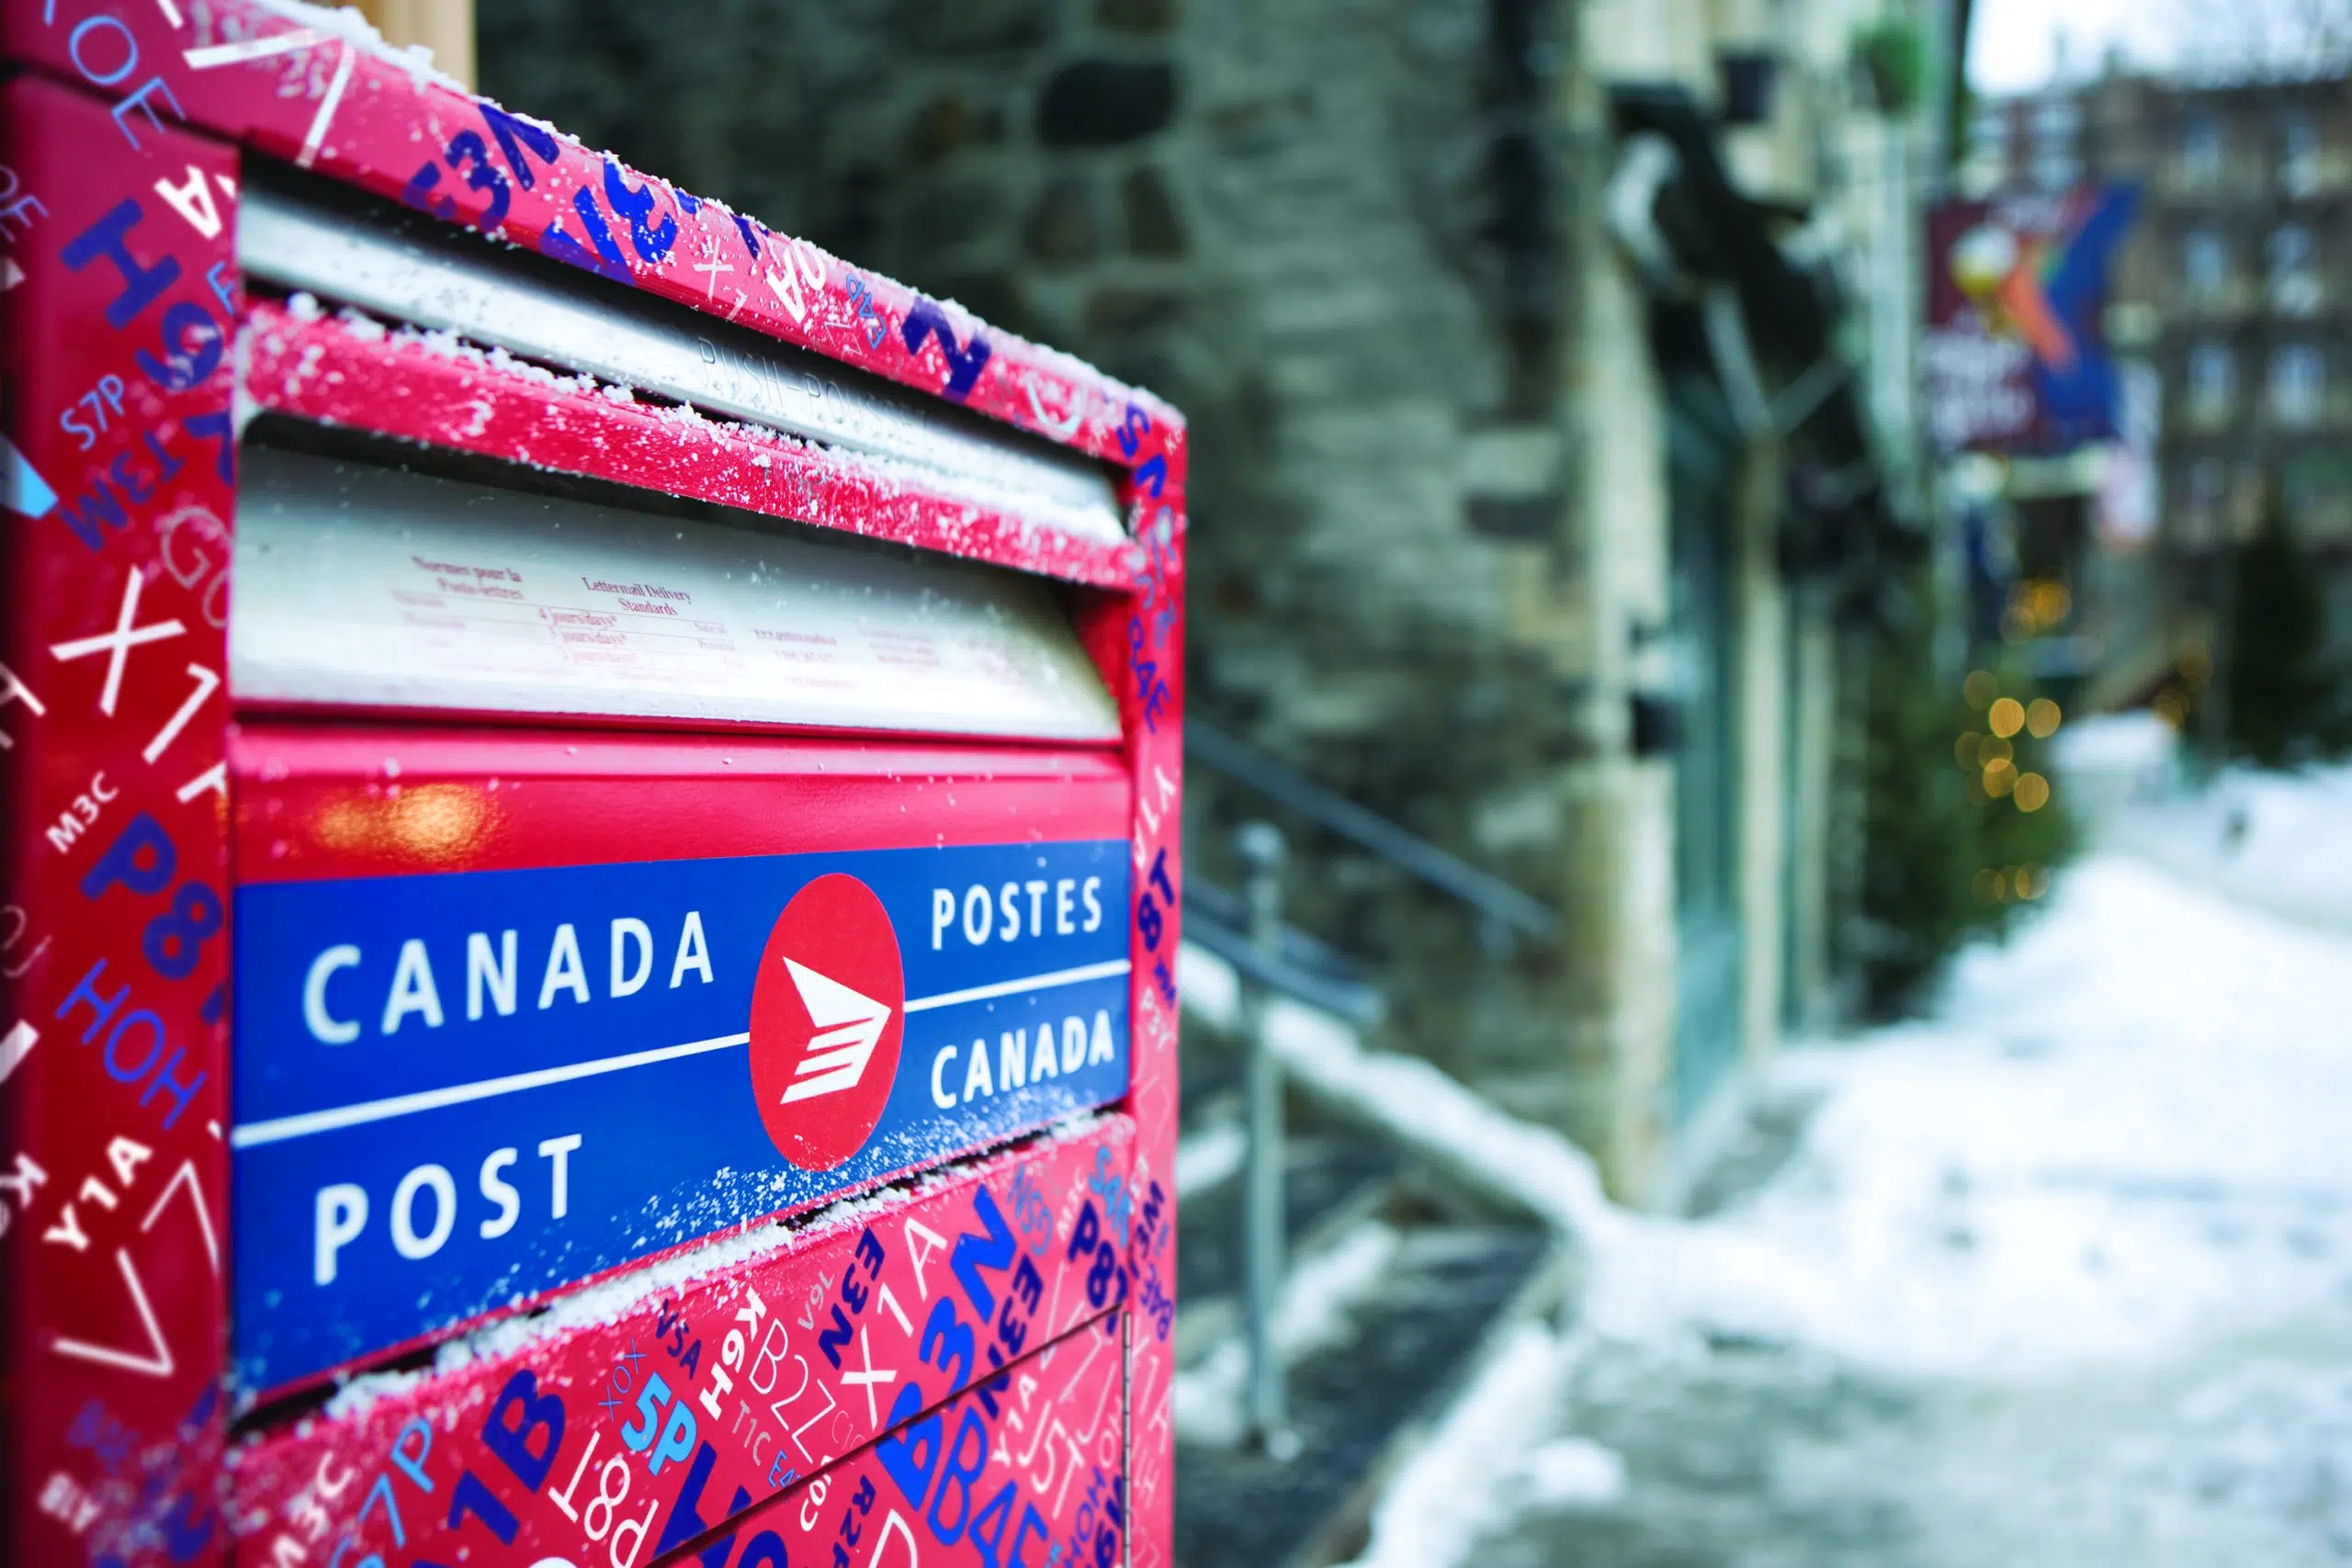 Canada Post warns of delays due to staff shortages amid Omicron